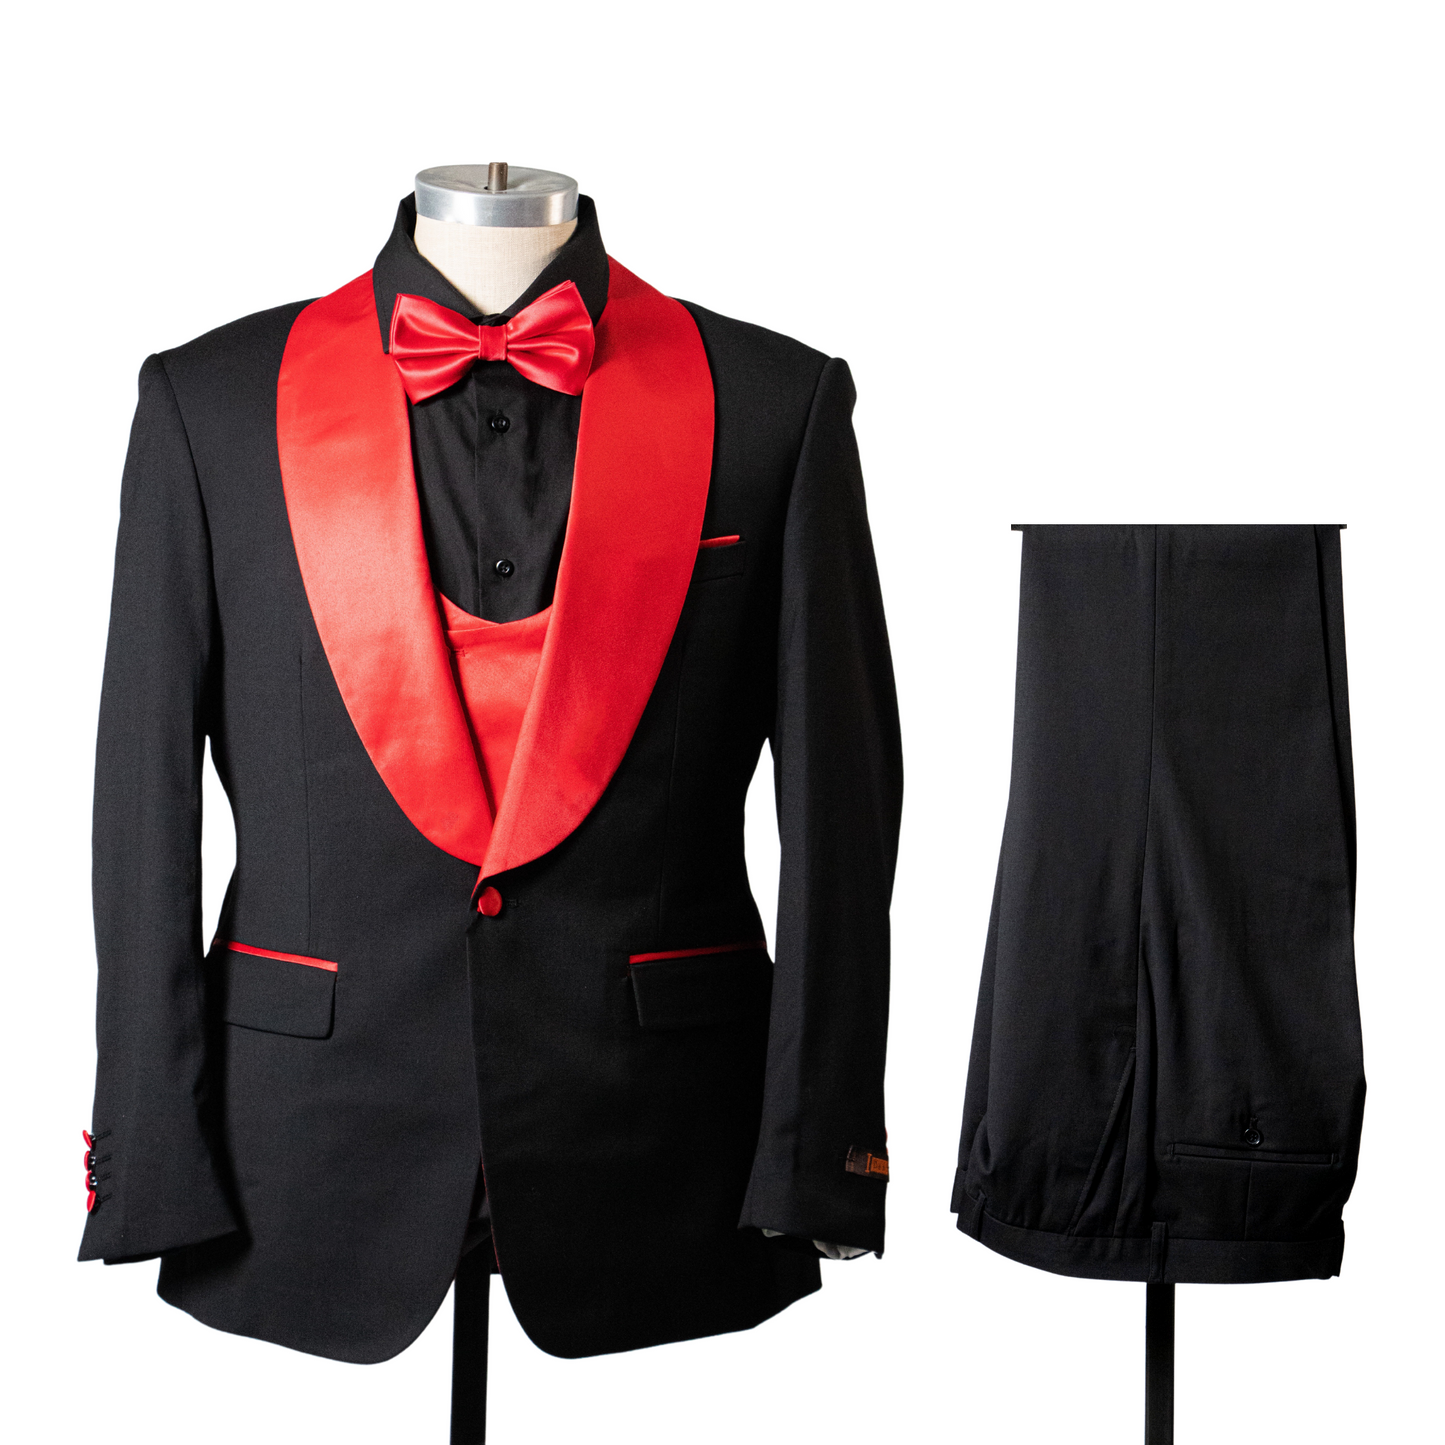 1 Button Shawl Lapel Tuxedo with Vest - Black & Red